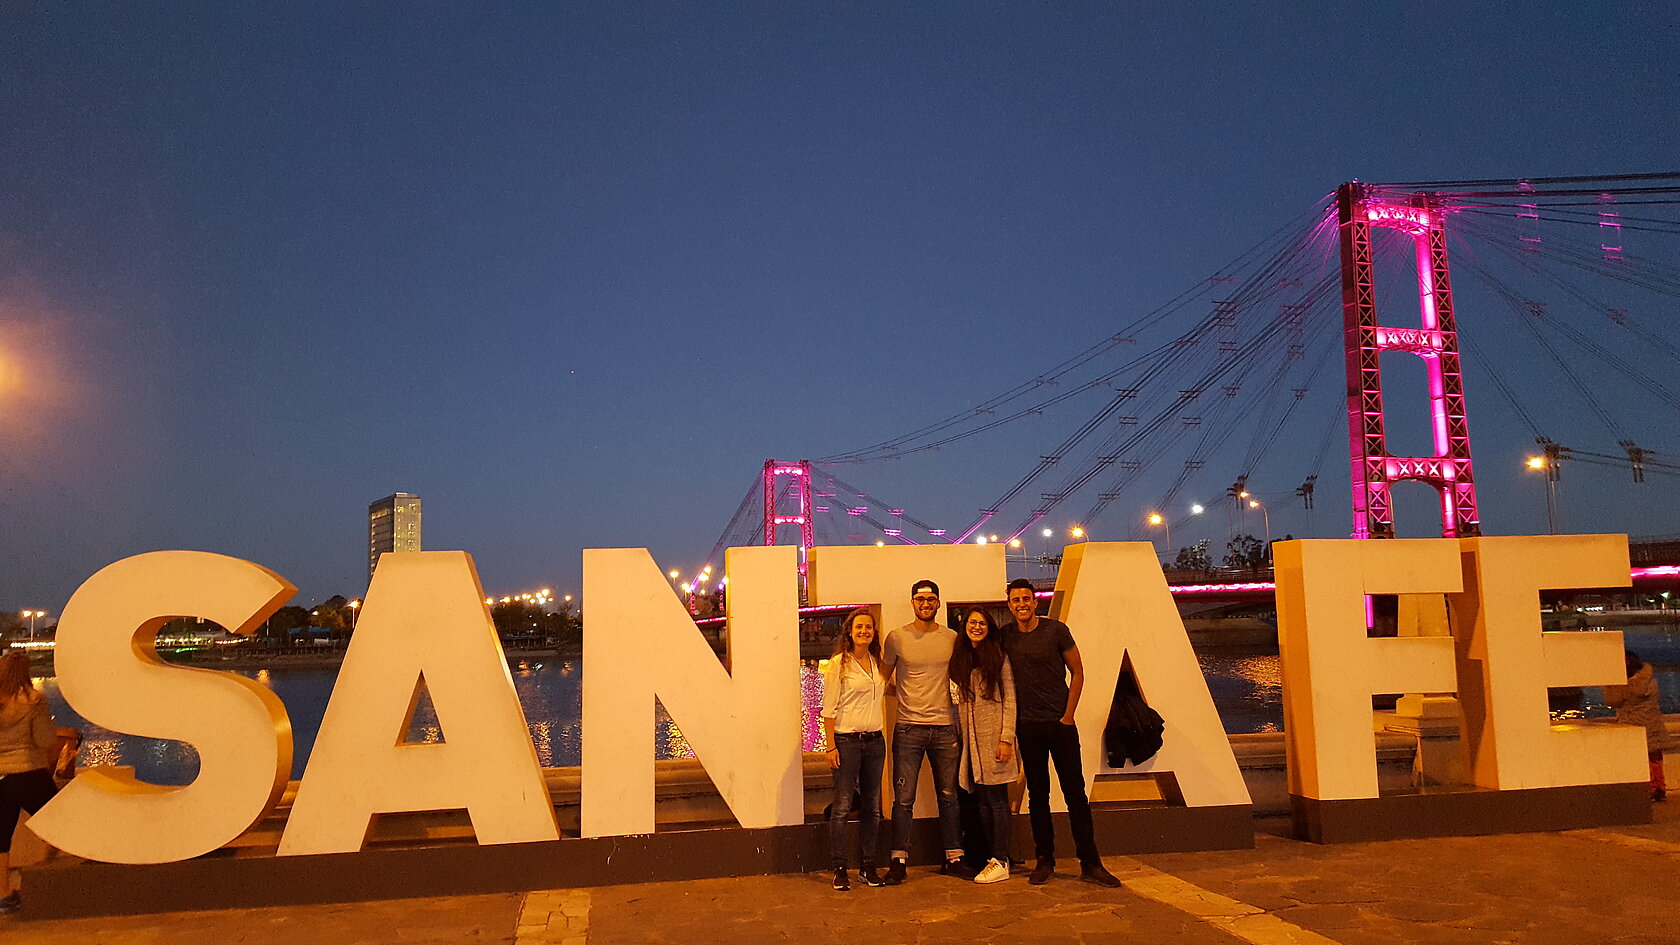 students stand in front of a bridge, at a sculpture of large letters forming the word "Santa Fe"